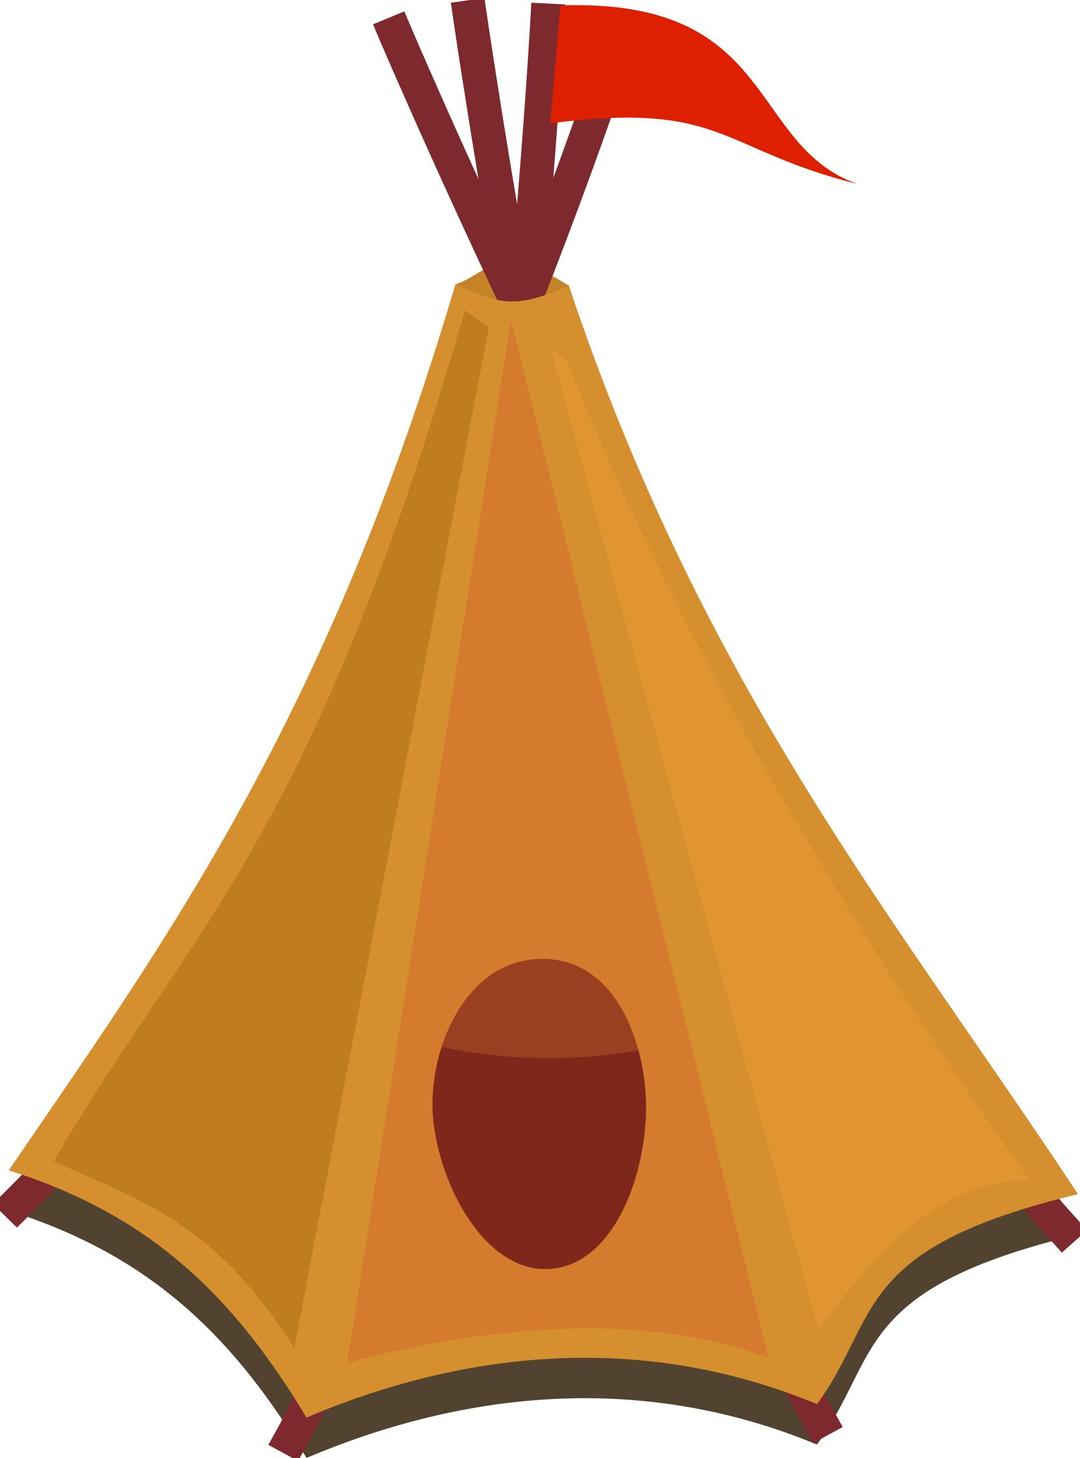 Cartoon tipi / tent with red flag png transparent